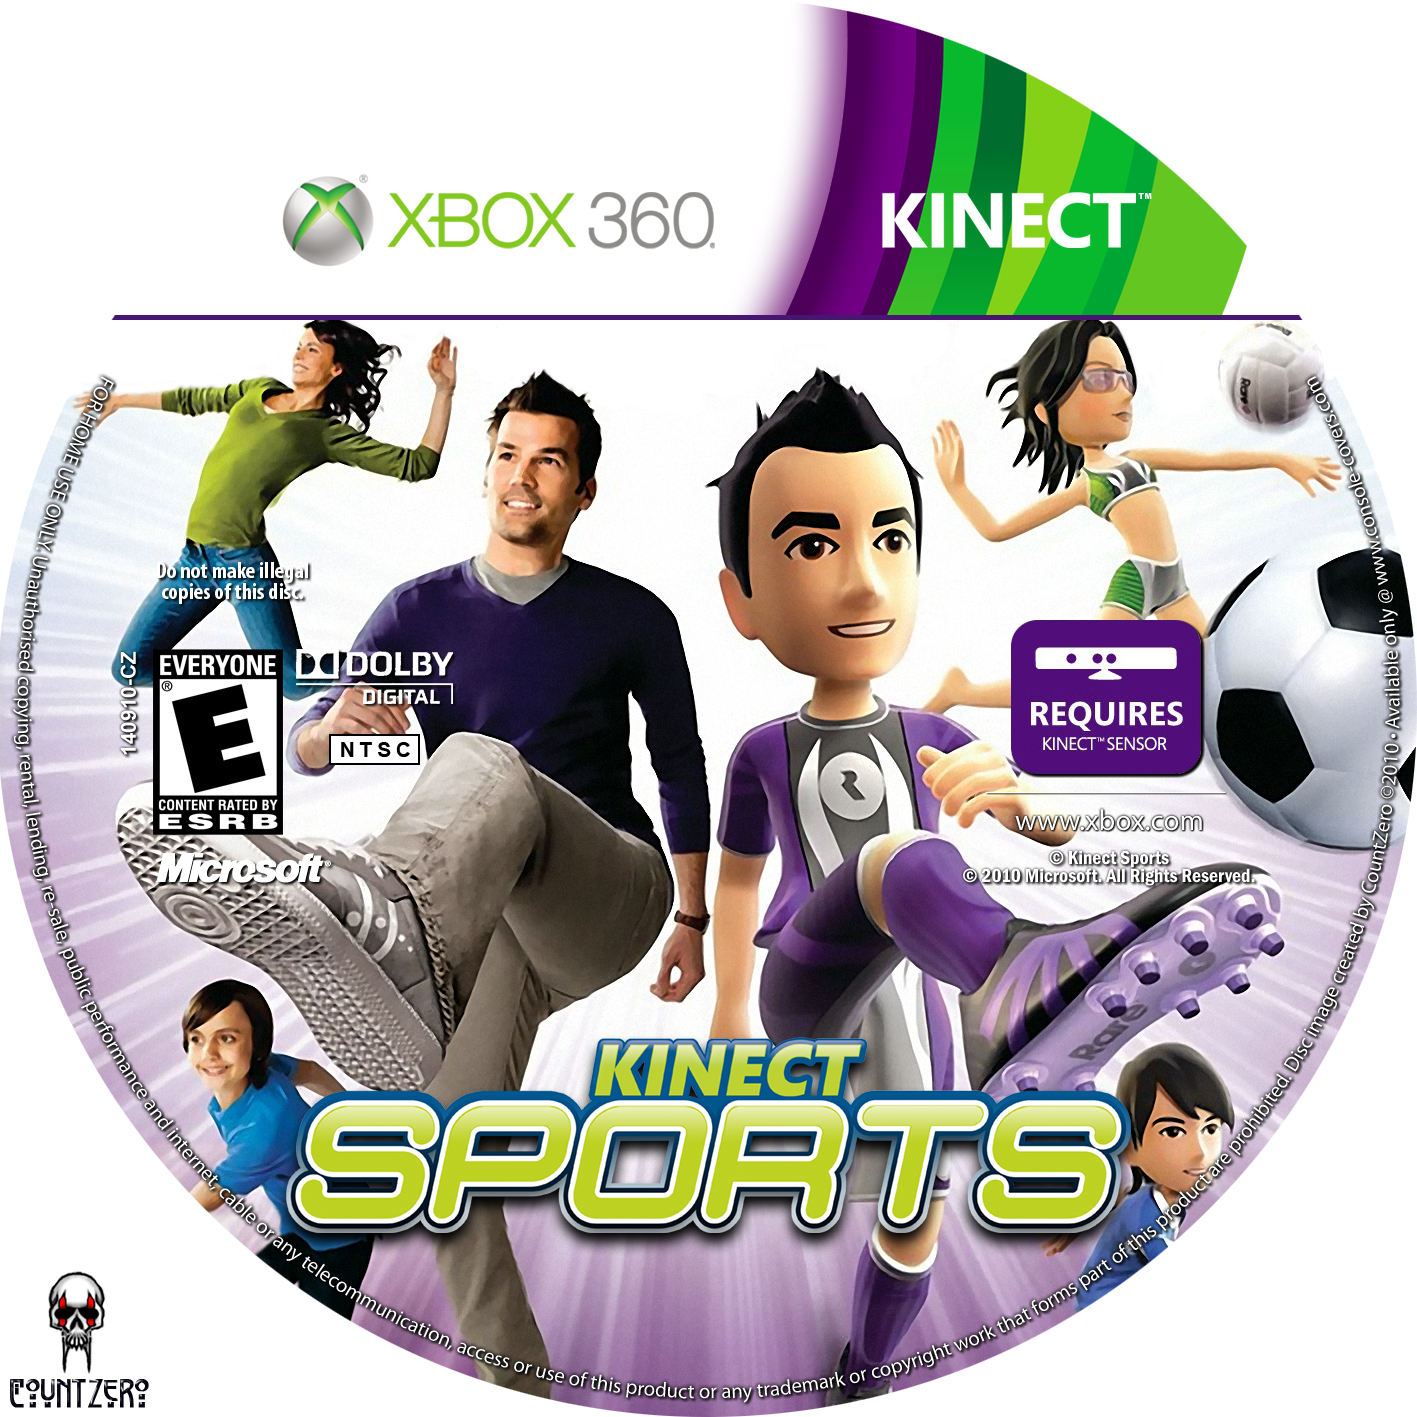 Kinect sports xbox 360. Xbox 360 Kinect Sports Ultimate. Kinect Sports Xbox 360 Disk. Kinect Sports Xbox 360 DVD. Kinect Sport Ultimate collection Xbox 360.